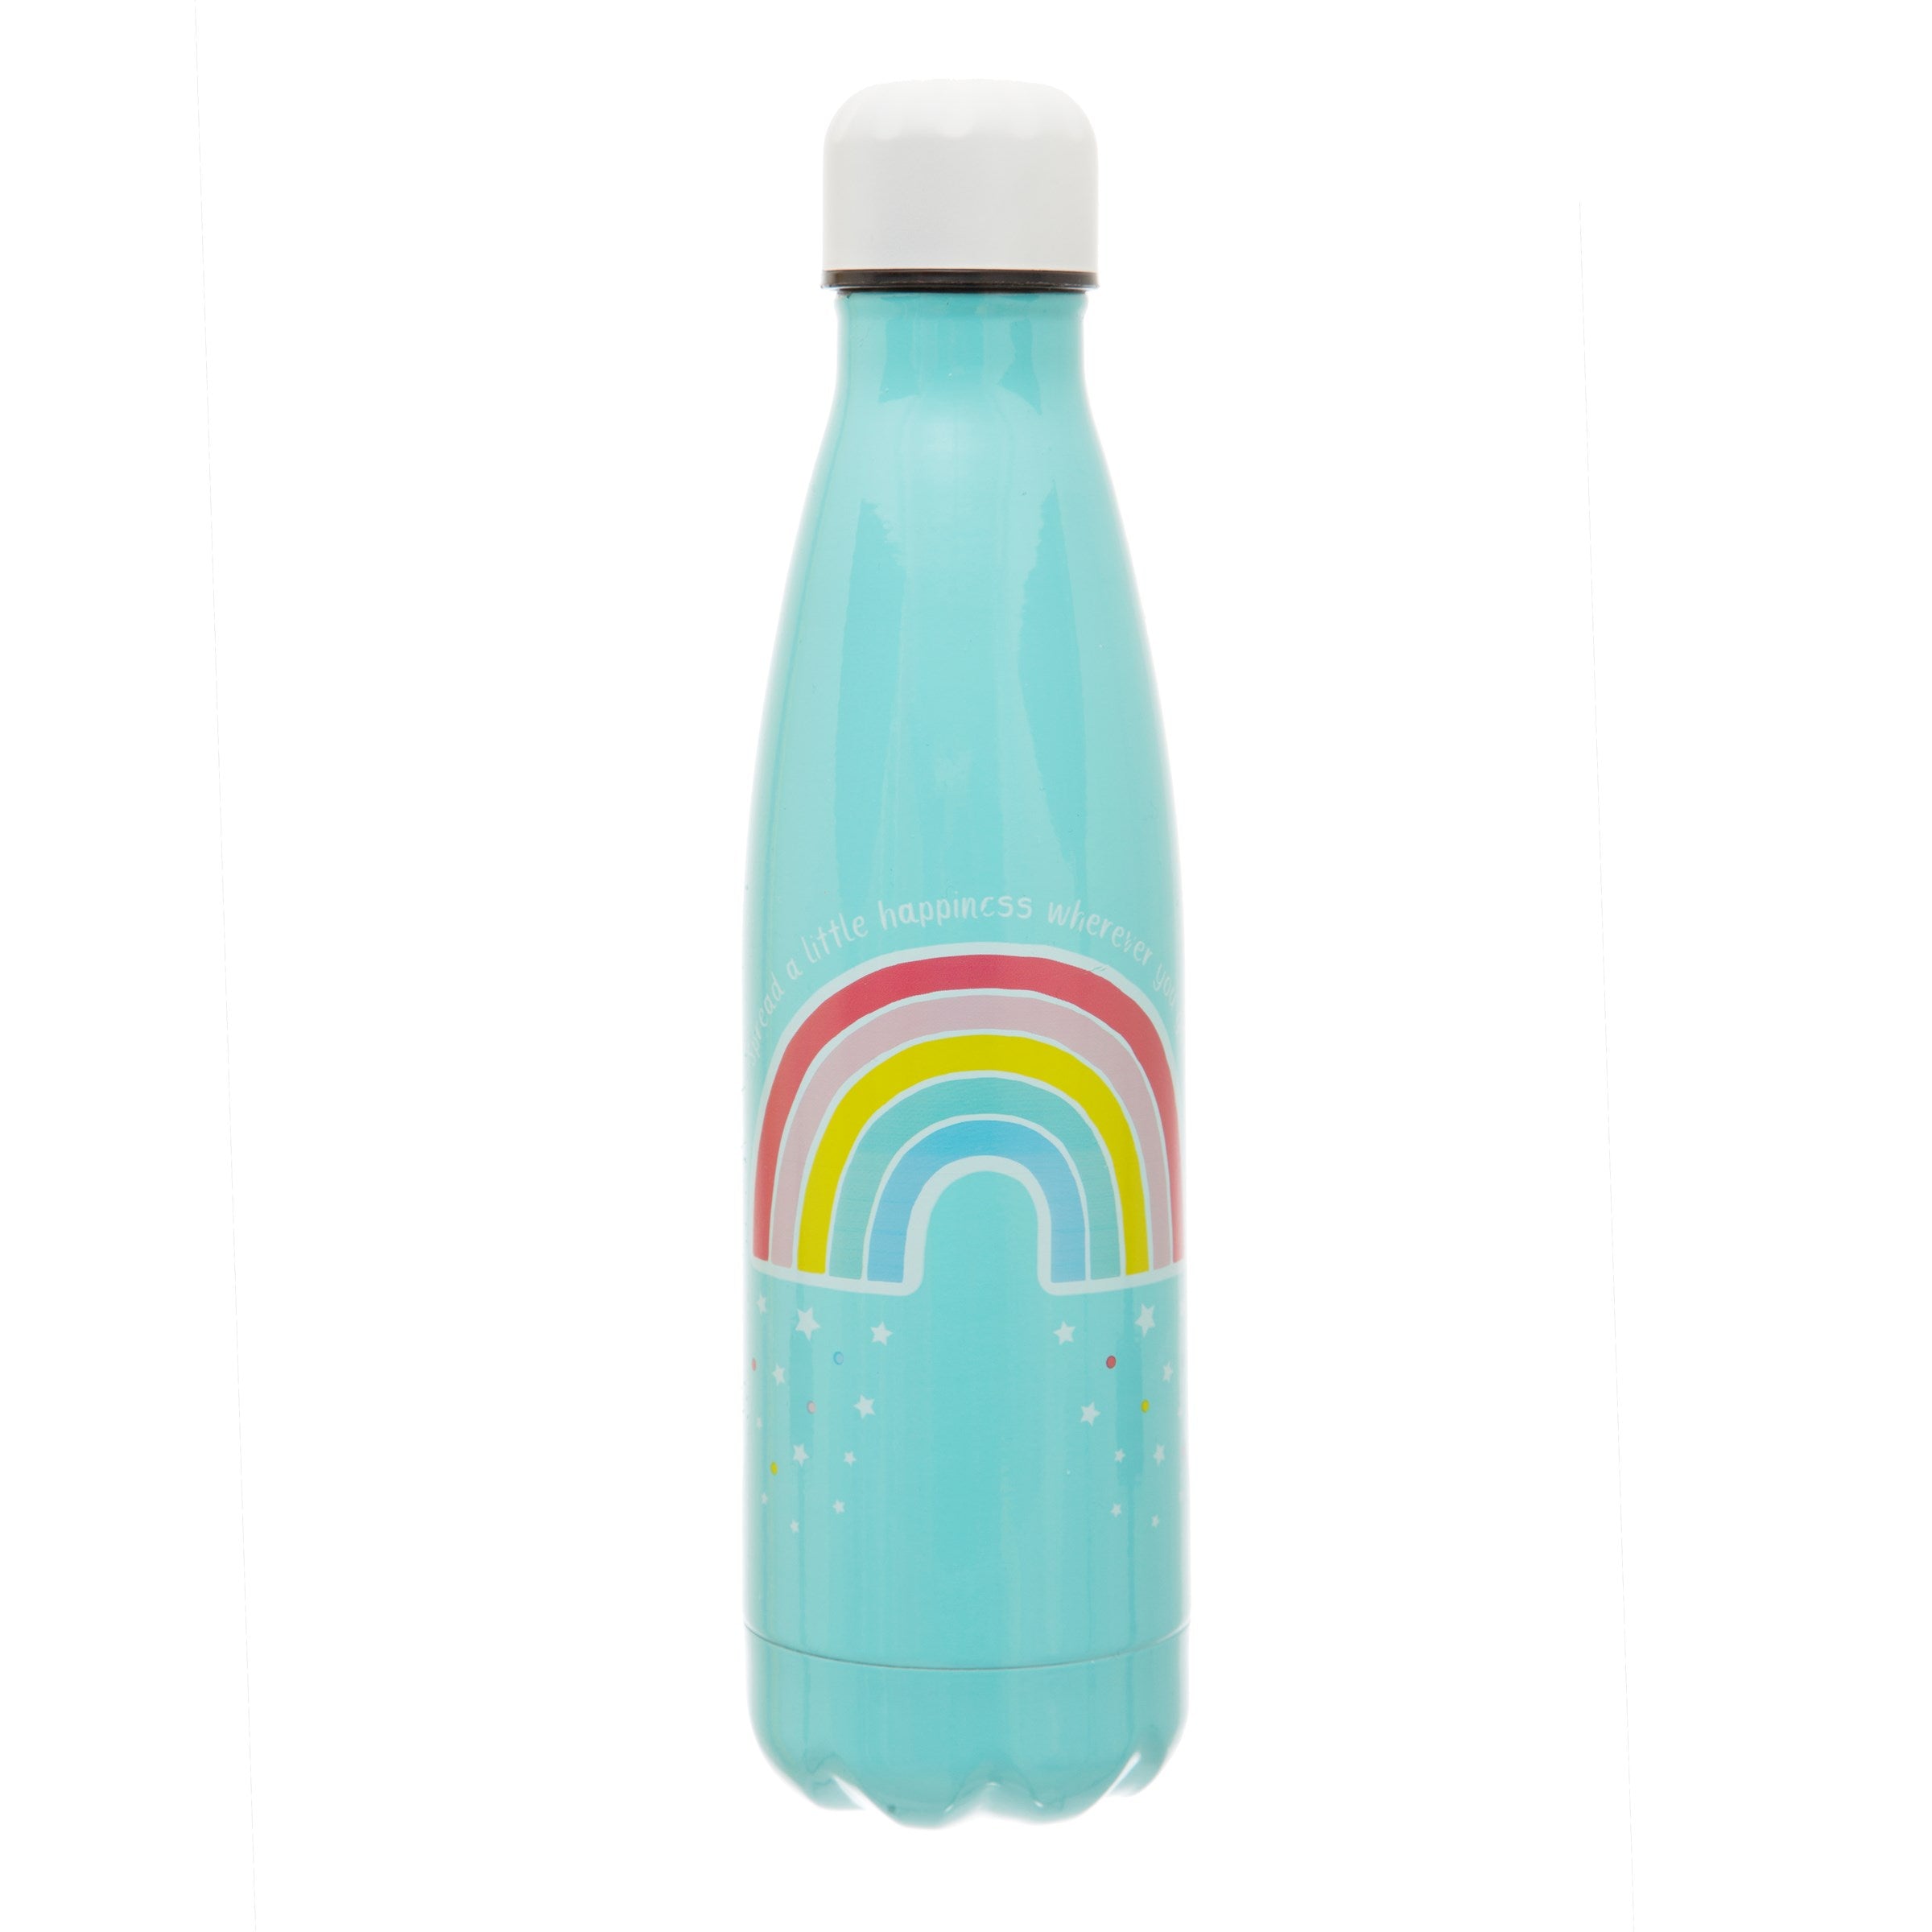 Sass and Belle Spread a Little Happiness wherever you go Rainbow Stainless Steel Water Bottle - The Cooks Cupboard Ltd